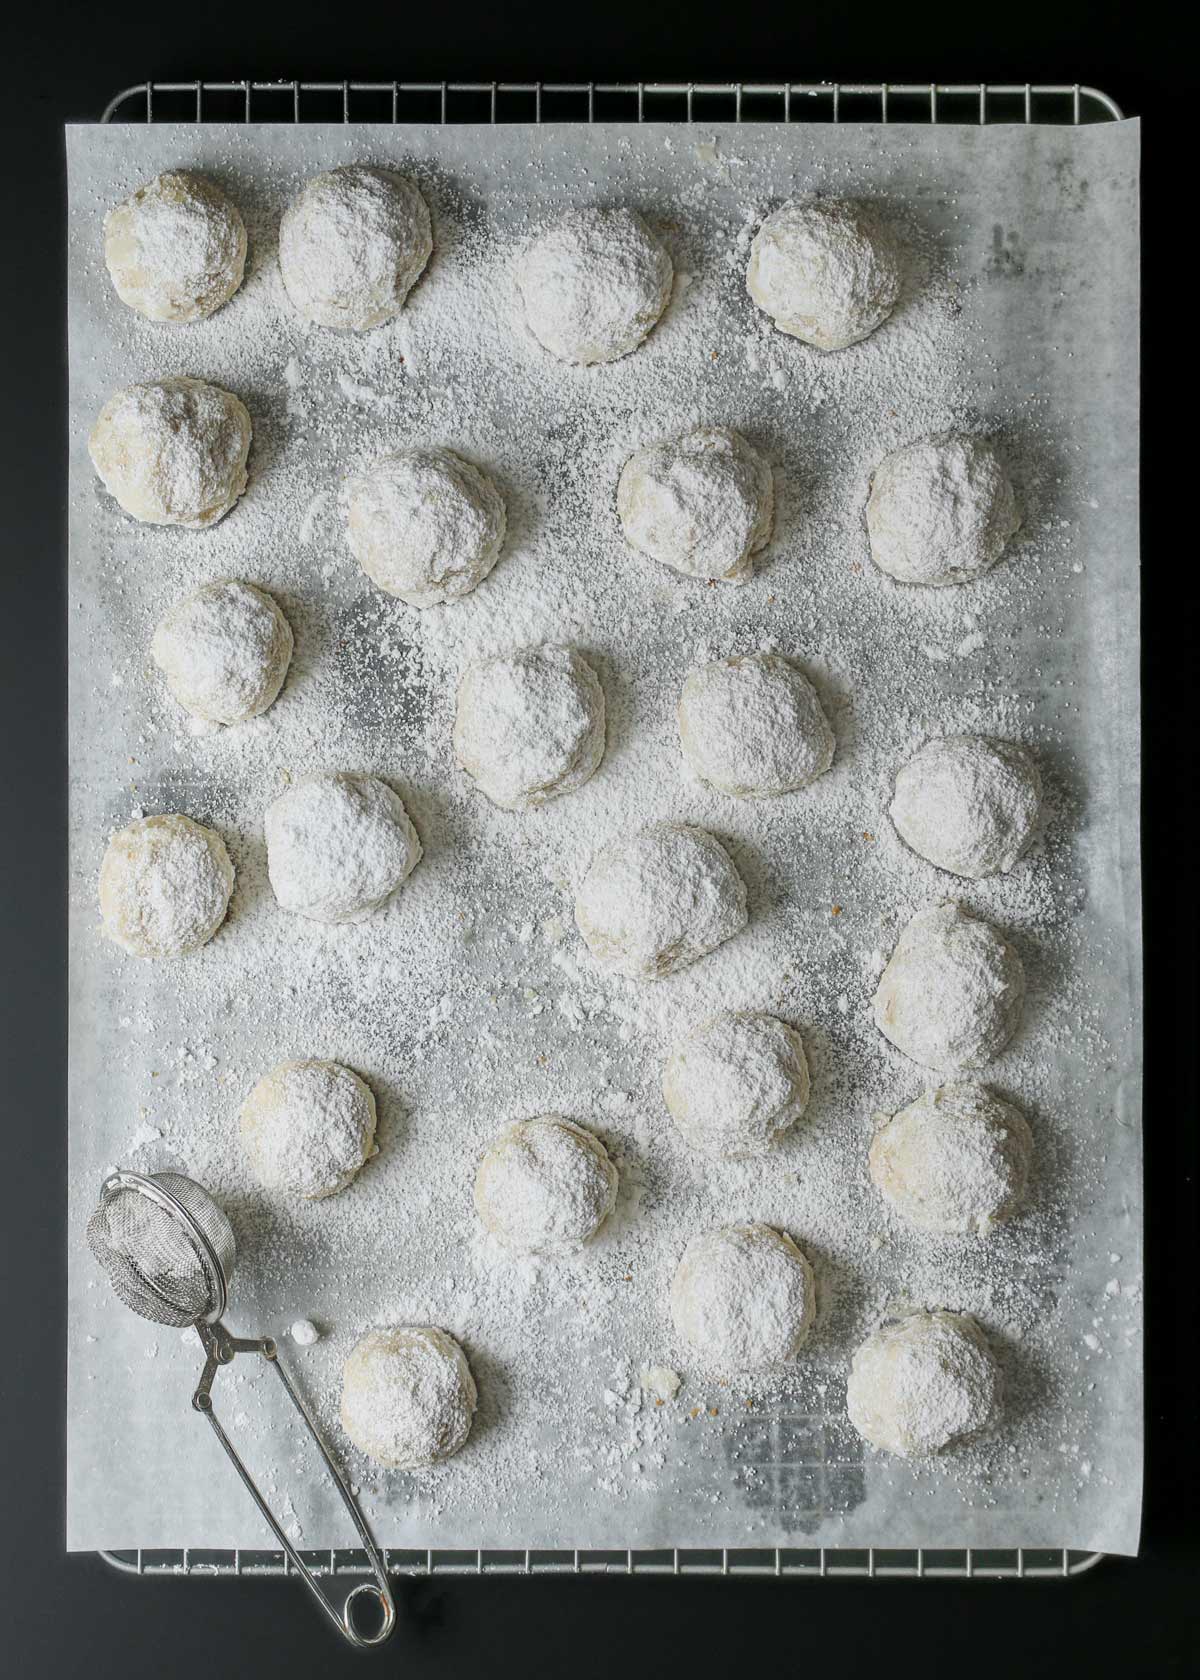 cookie balls coated with powdered sugar.